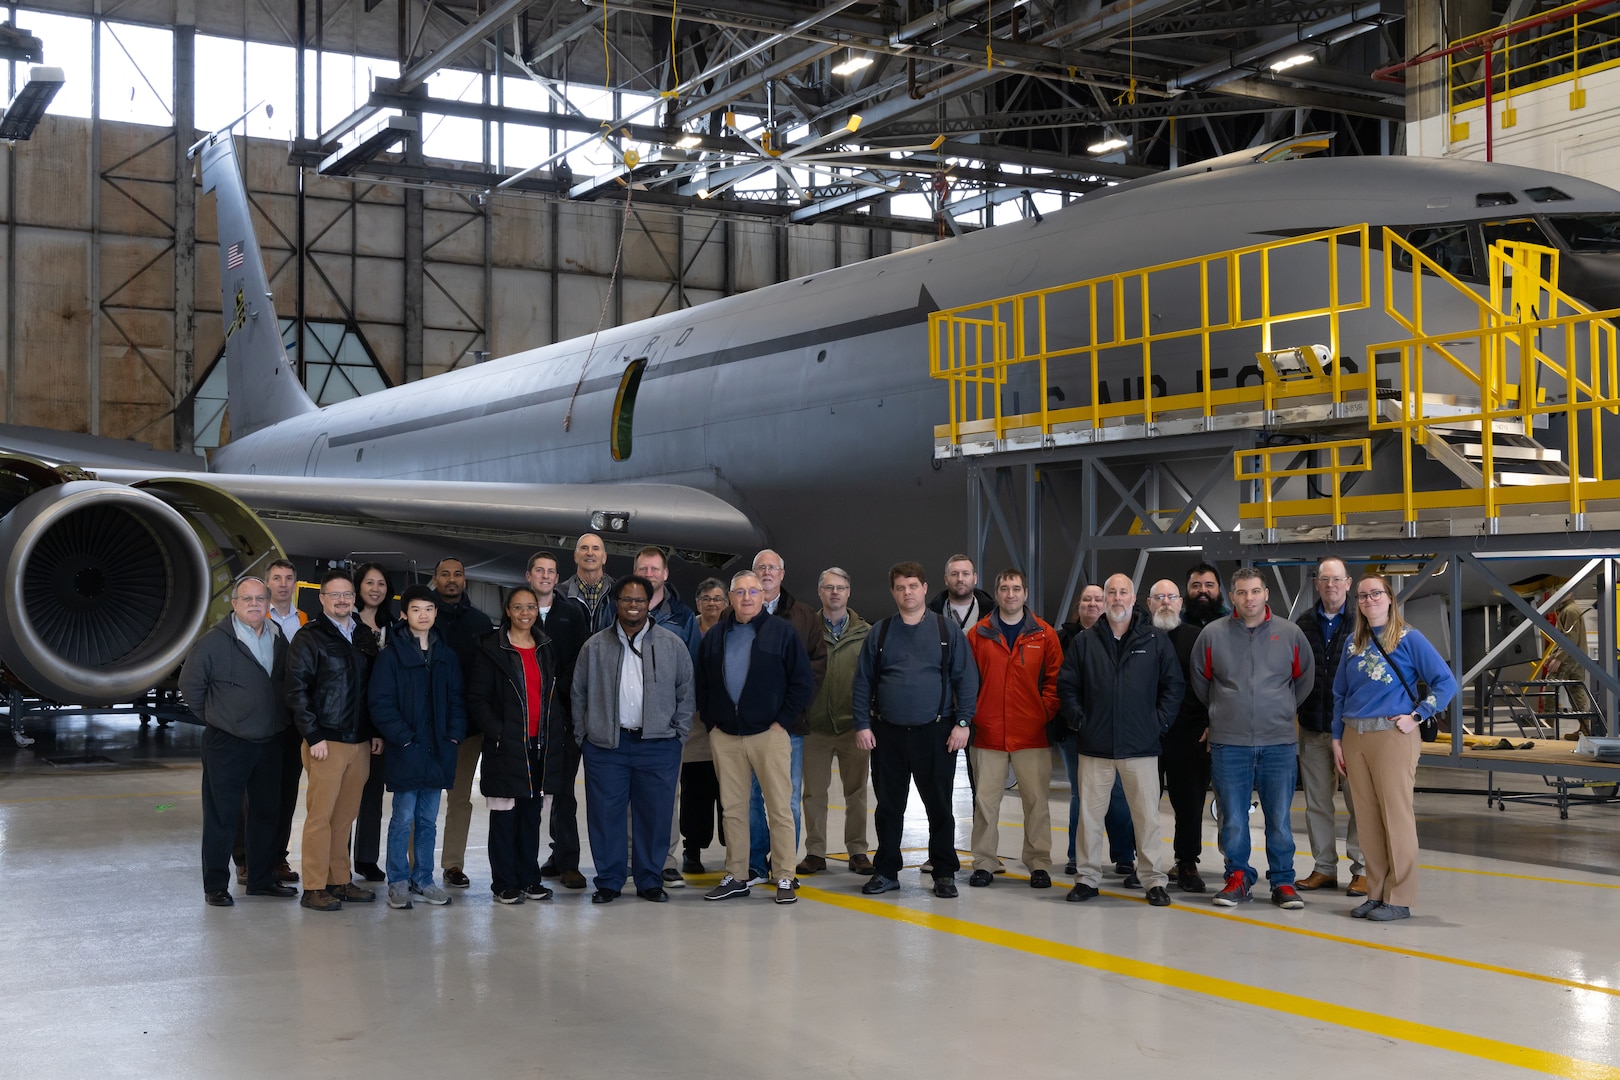 A large group of people stand in front of a gray cargo/refueling plane undergoing phase maintenance and inspection or ISO. It is surrounded by scaffolding and is inside a hanger.